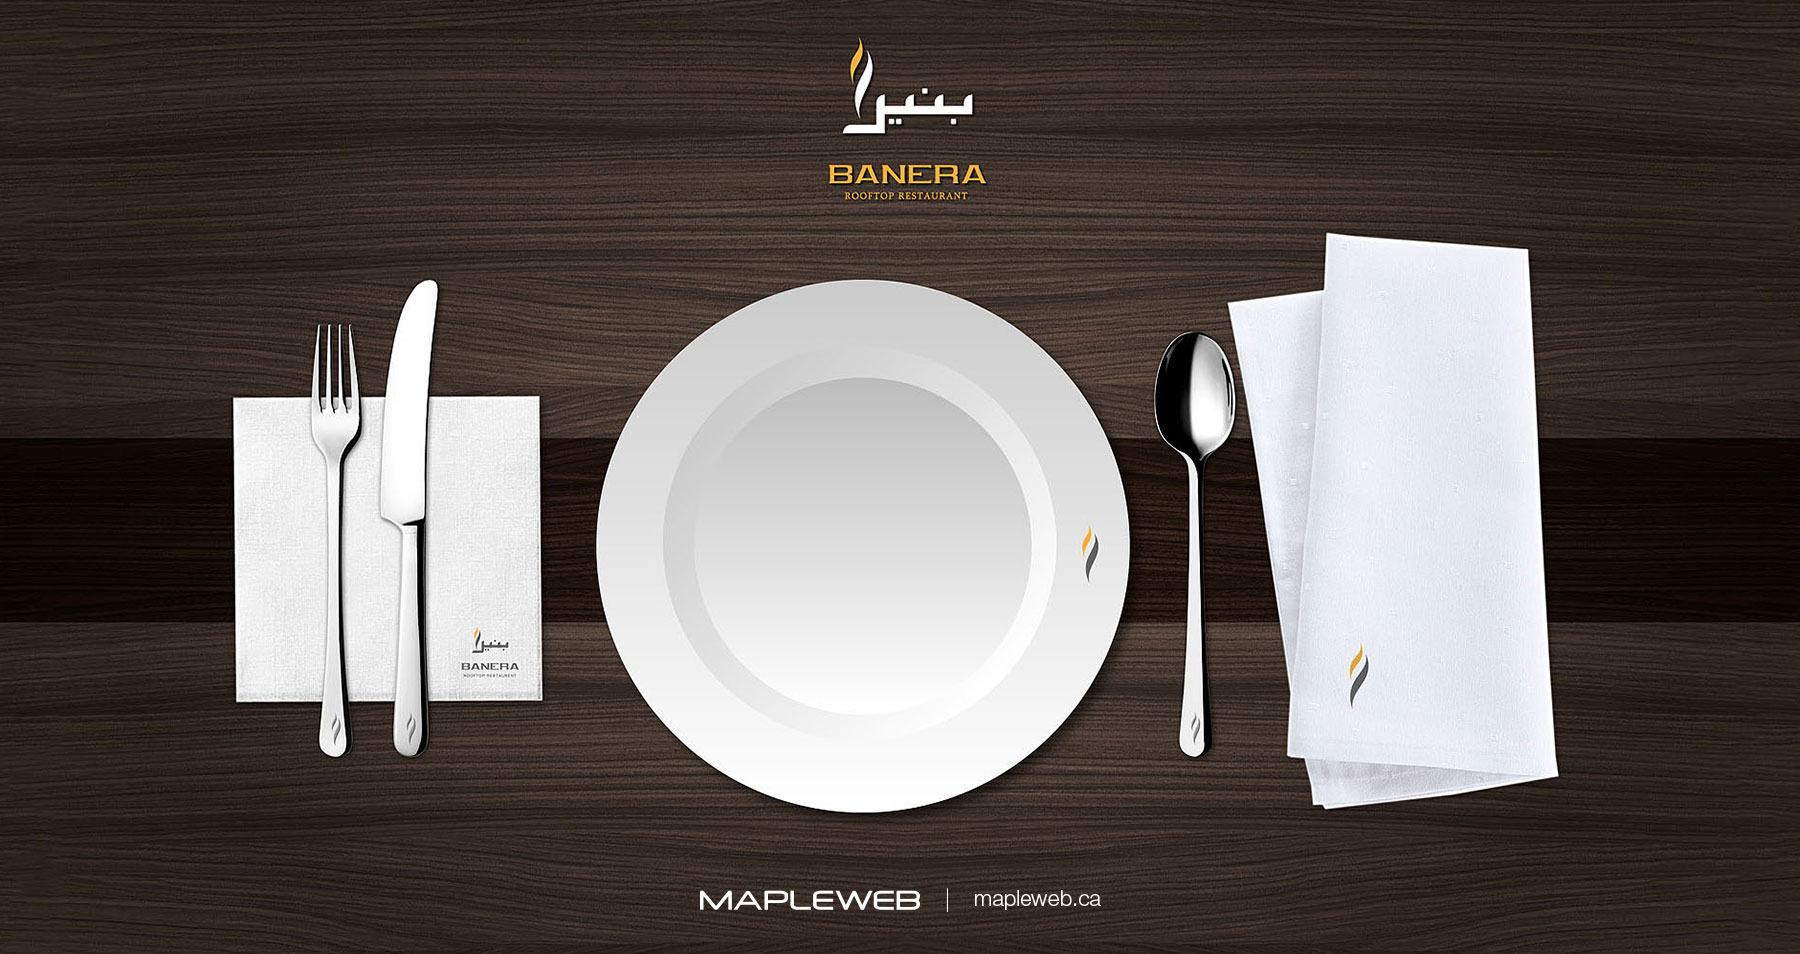 Banera RoofTop Plate Spoon Fork Knife and Napkins Brand design by Mapleweb